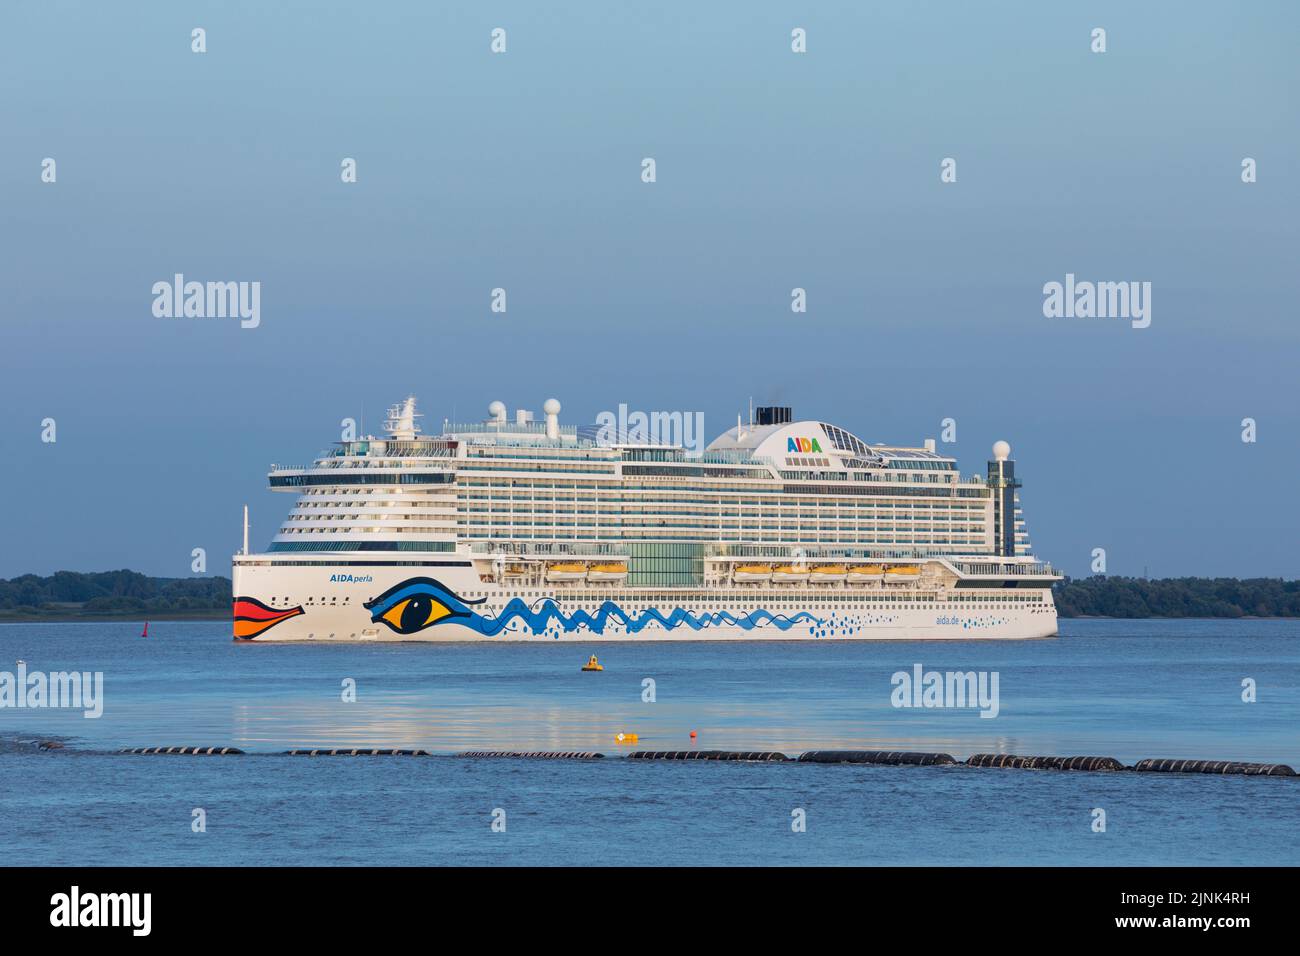 Stade, Germany – August 7, 2022: Cruise ship AIDAPerla, owned by Carnival Corporation, leaving Hamburg on Elbe river at dusk Stock Photo